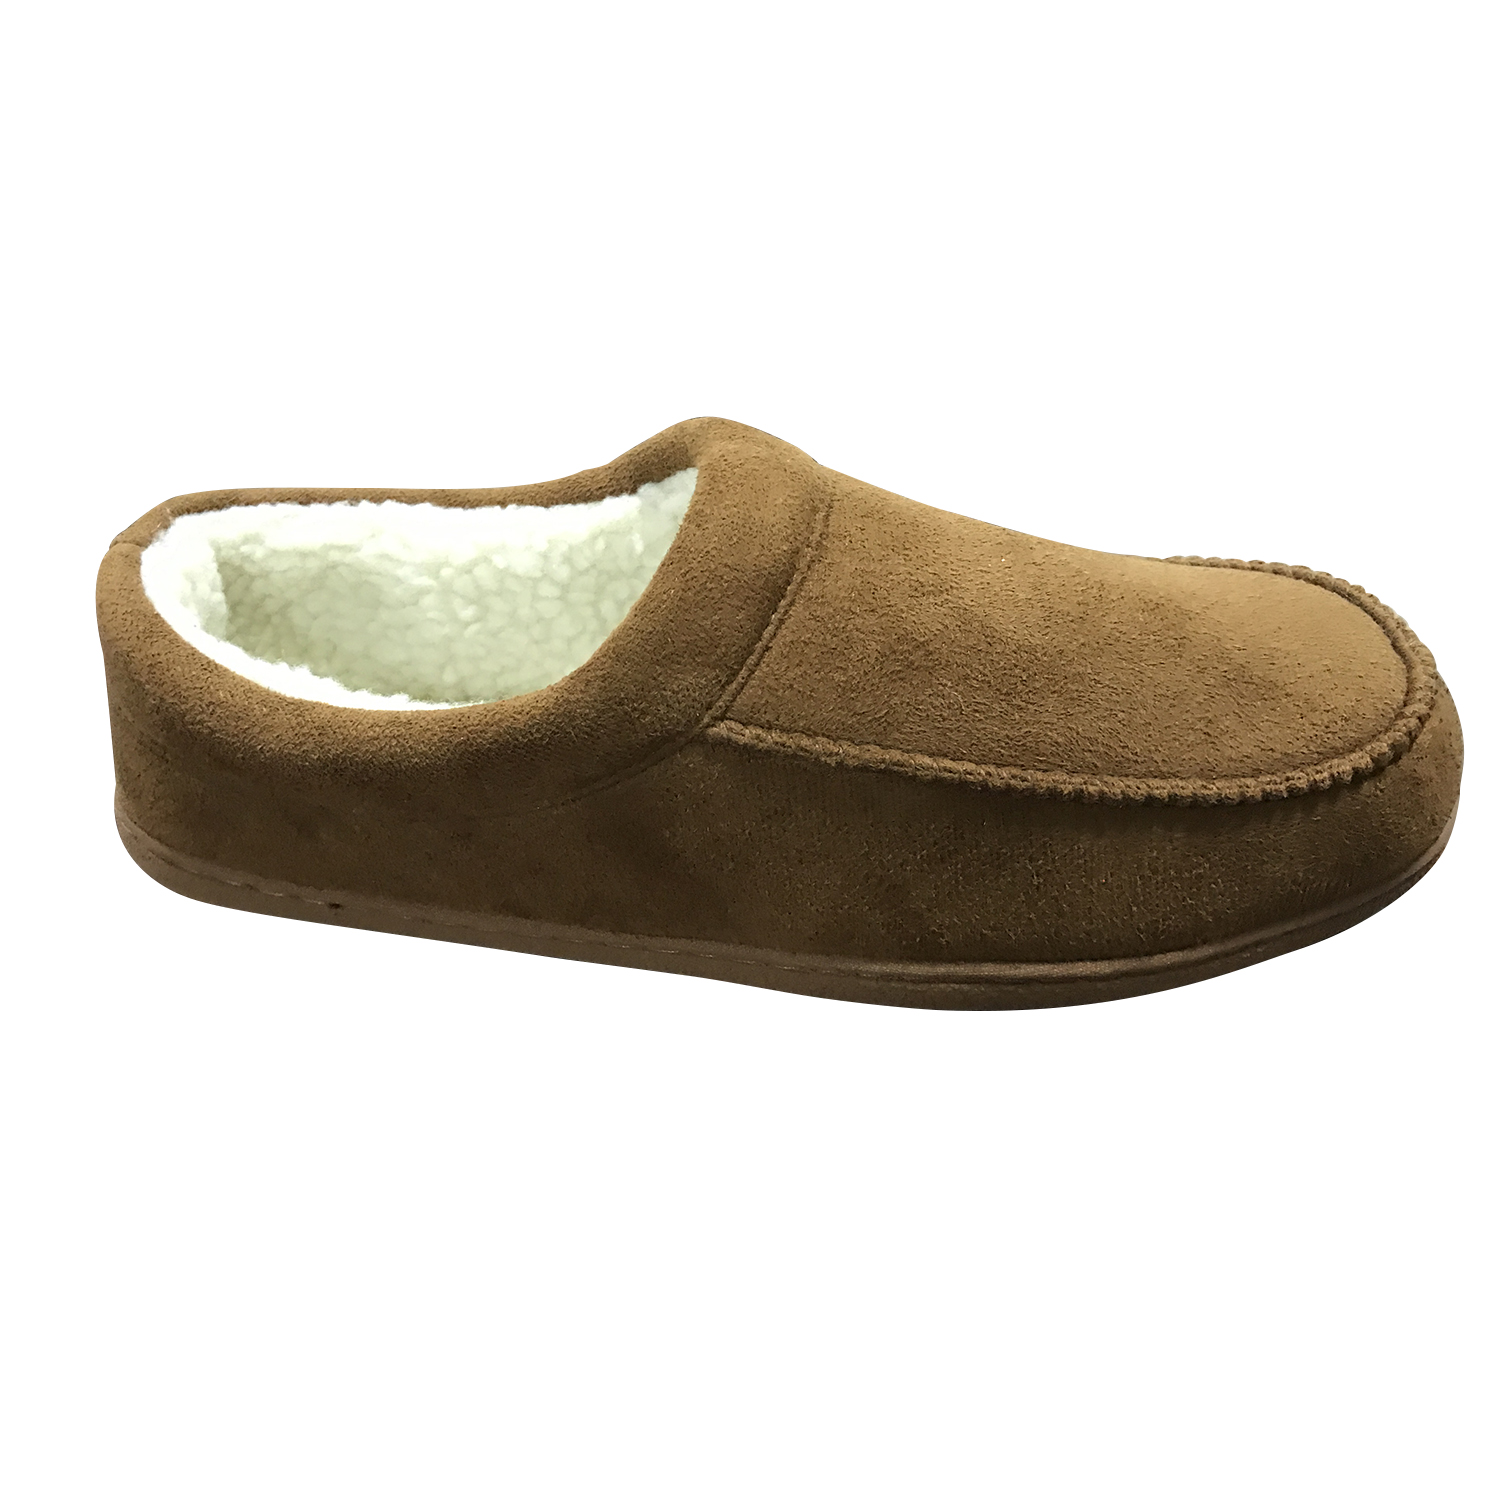 Stylish Casual Slippers for Men to Elevate Your Comfort and Style